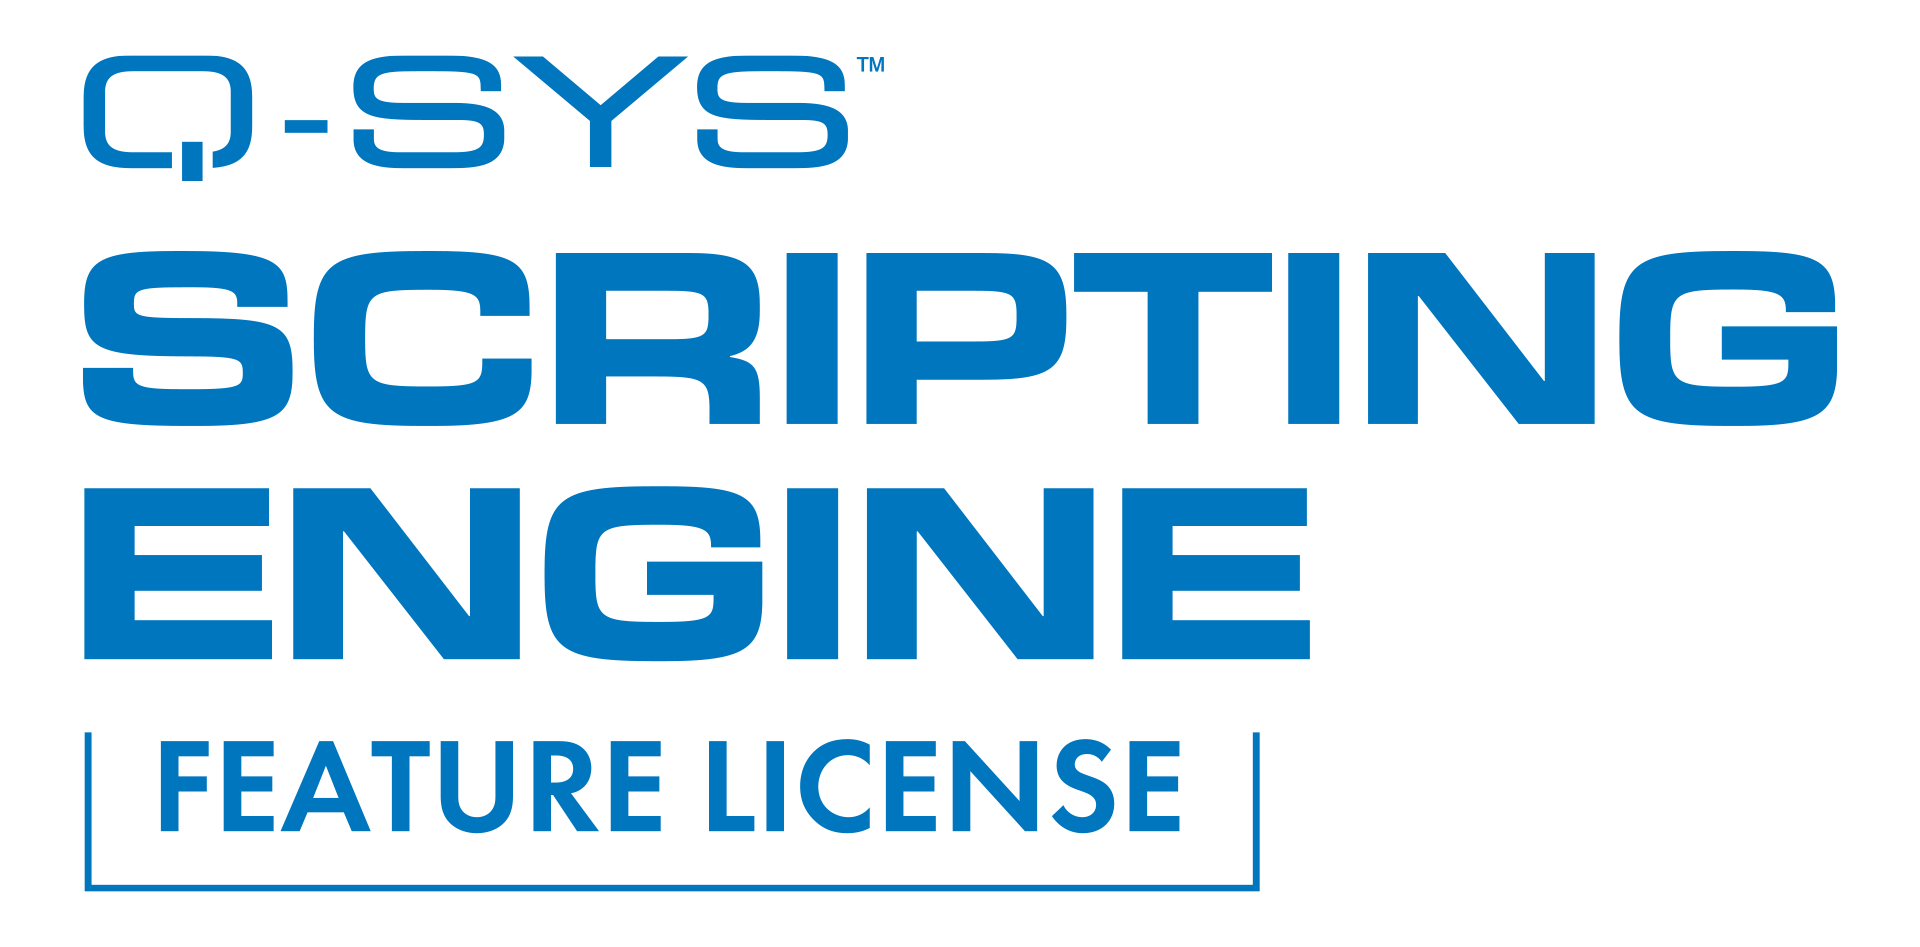 Image text: Q-SYS Scripting Engine Feature License